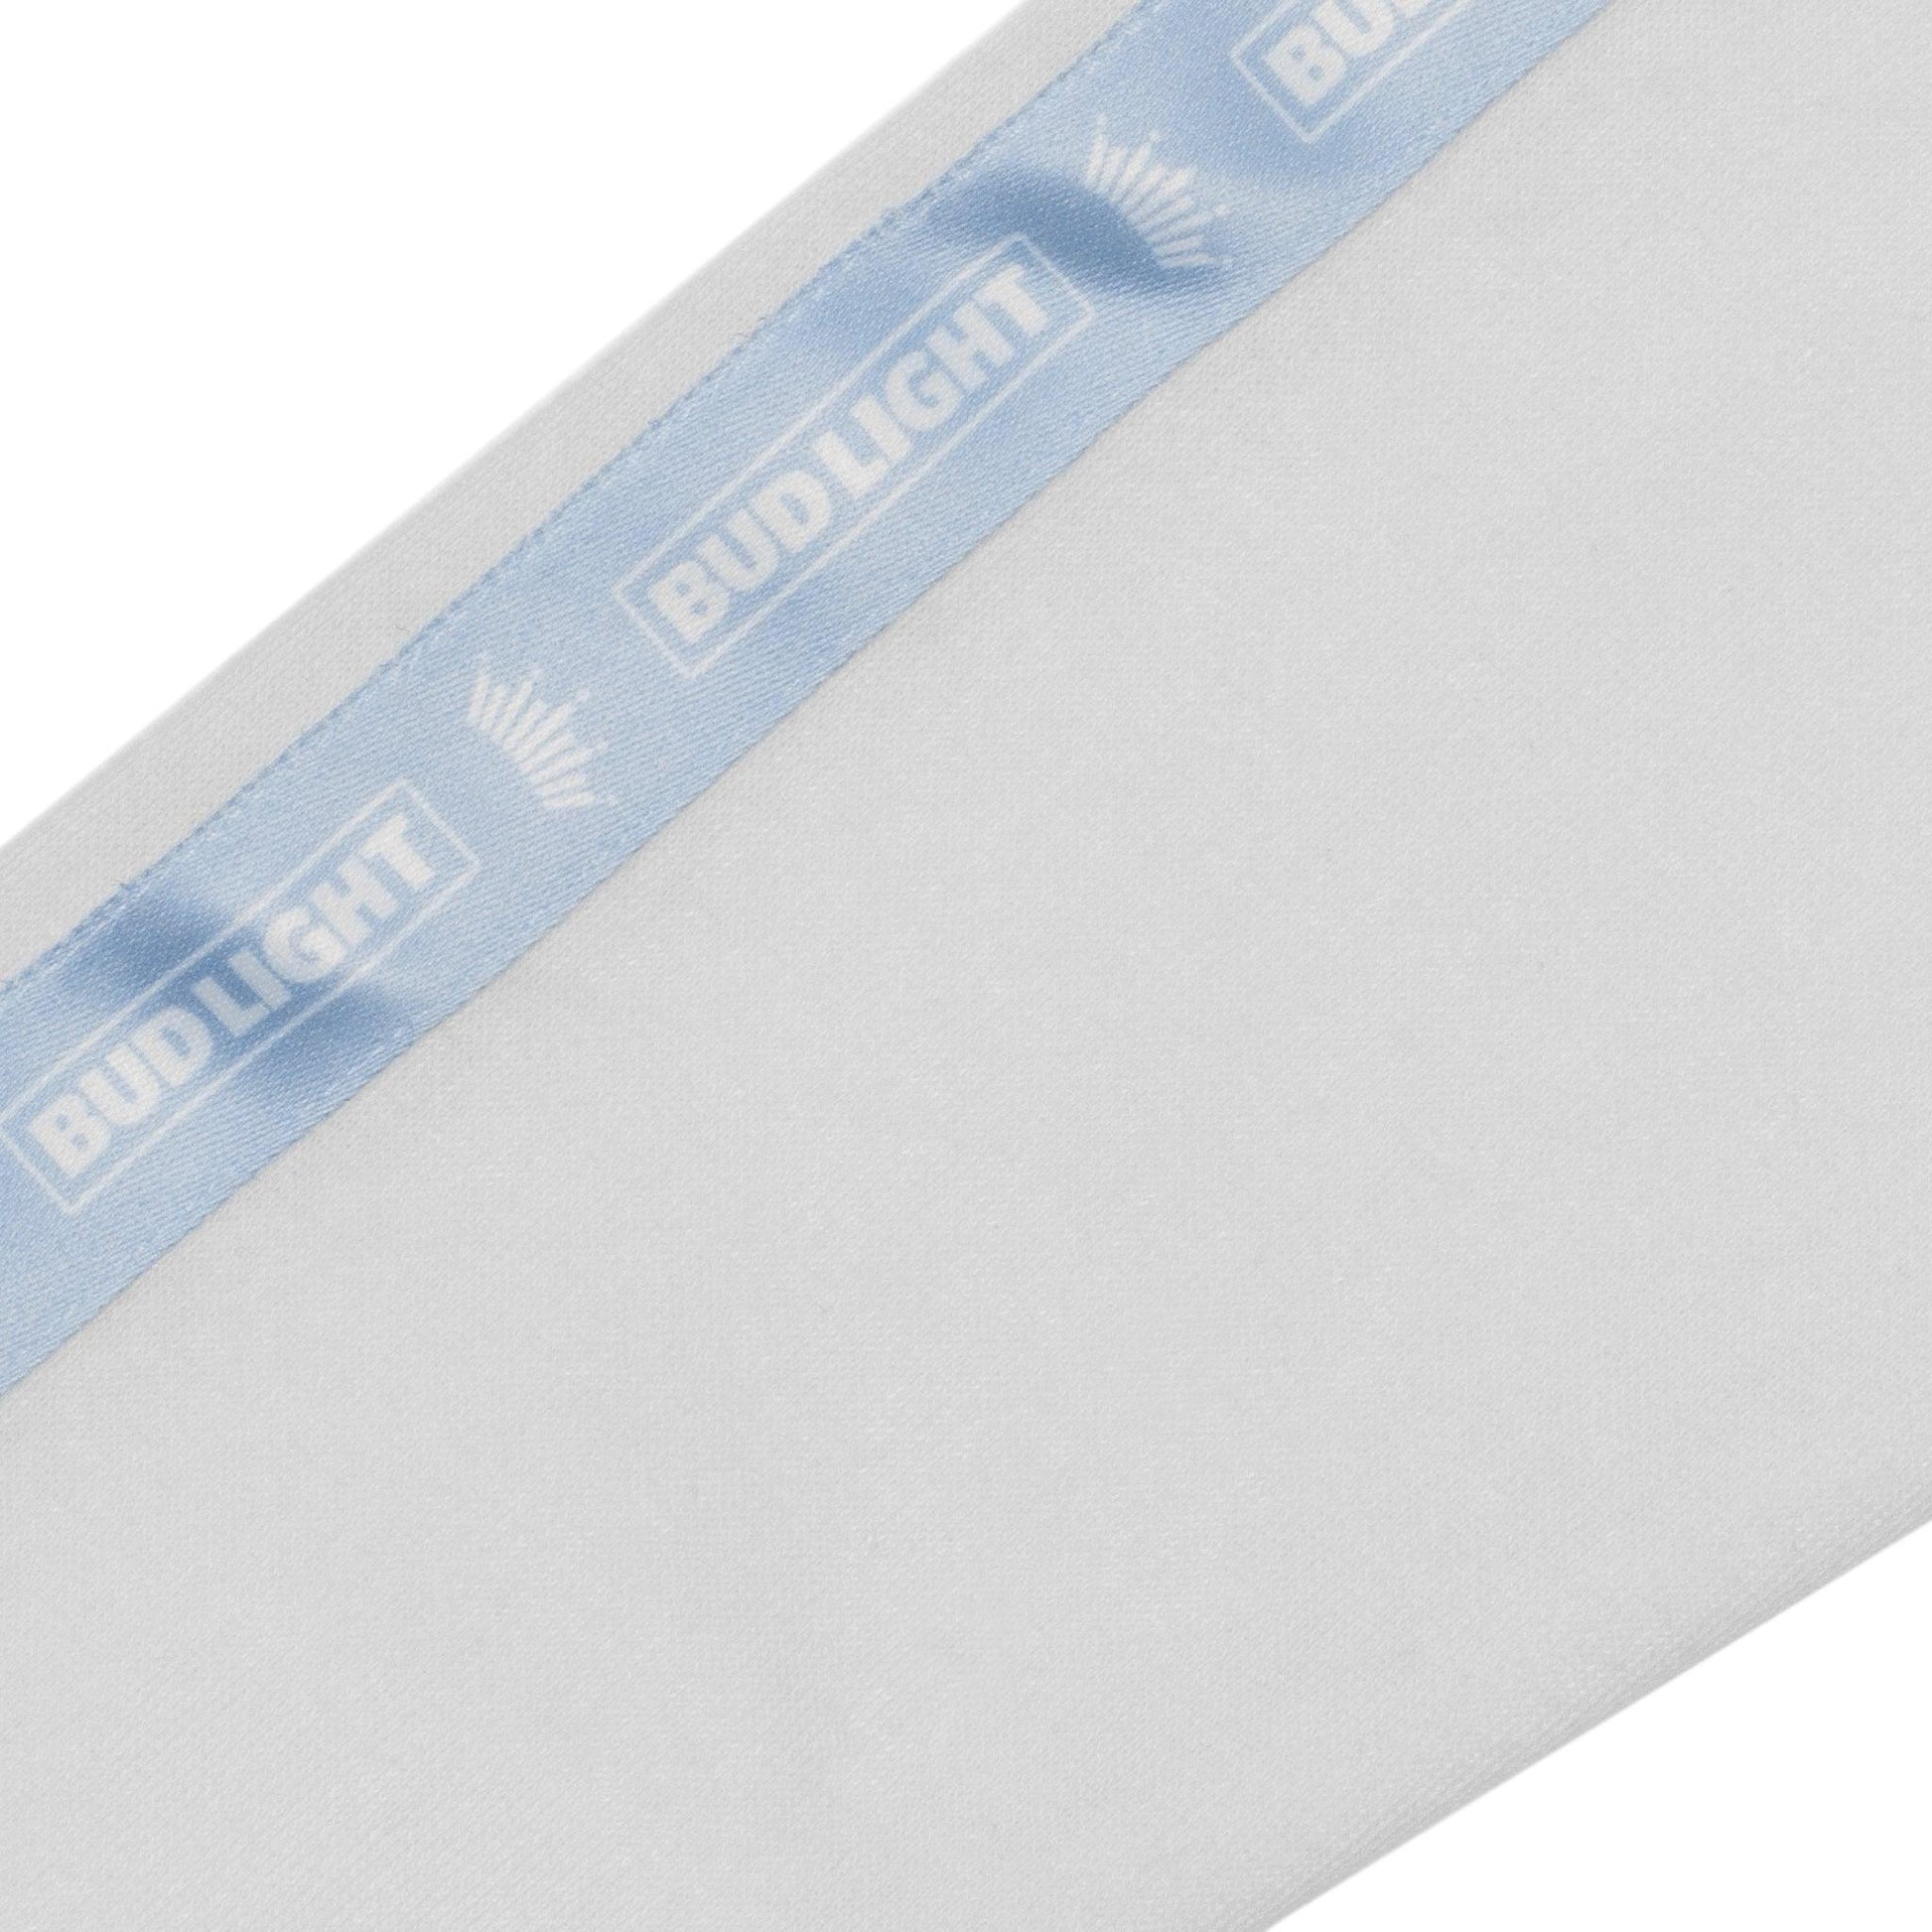 Close up of nylon ribbon stripe with Bud Light horizontal logo and crown screen printed on